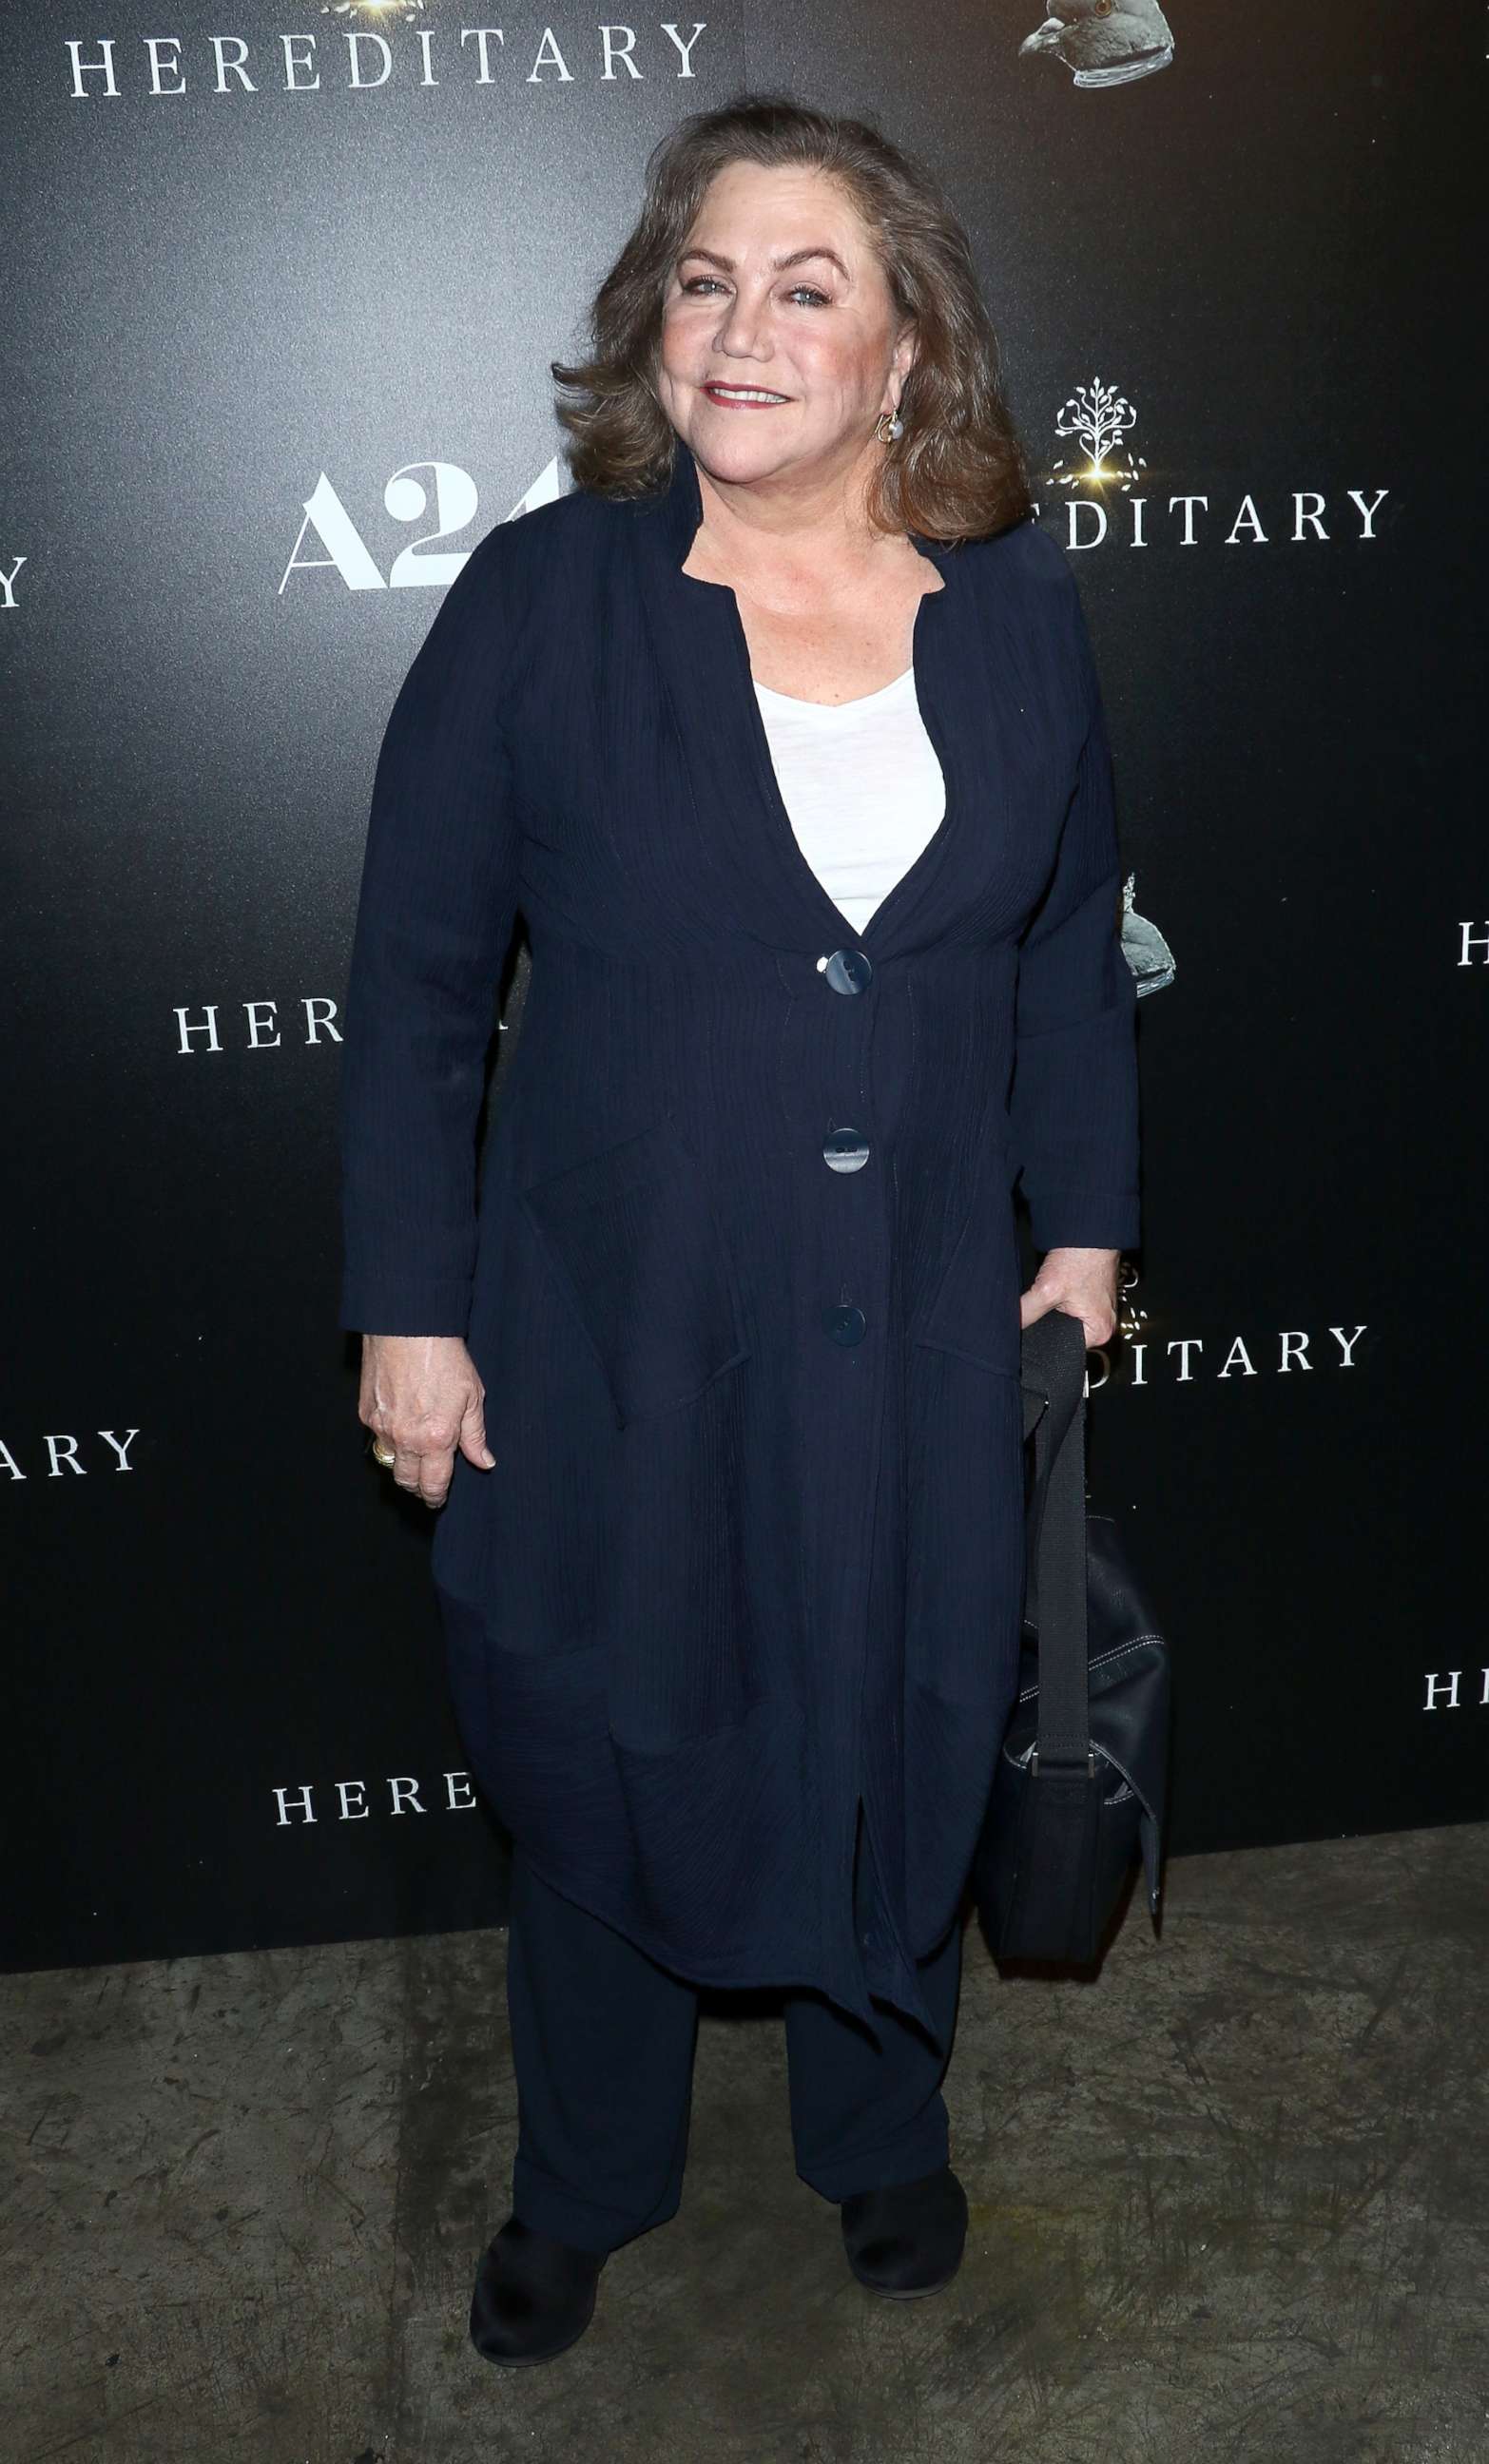 PHOTO: Kathleen Turner attends the screening of "Hereditary" at Metrograph, June 5, 2018, in New York City.